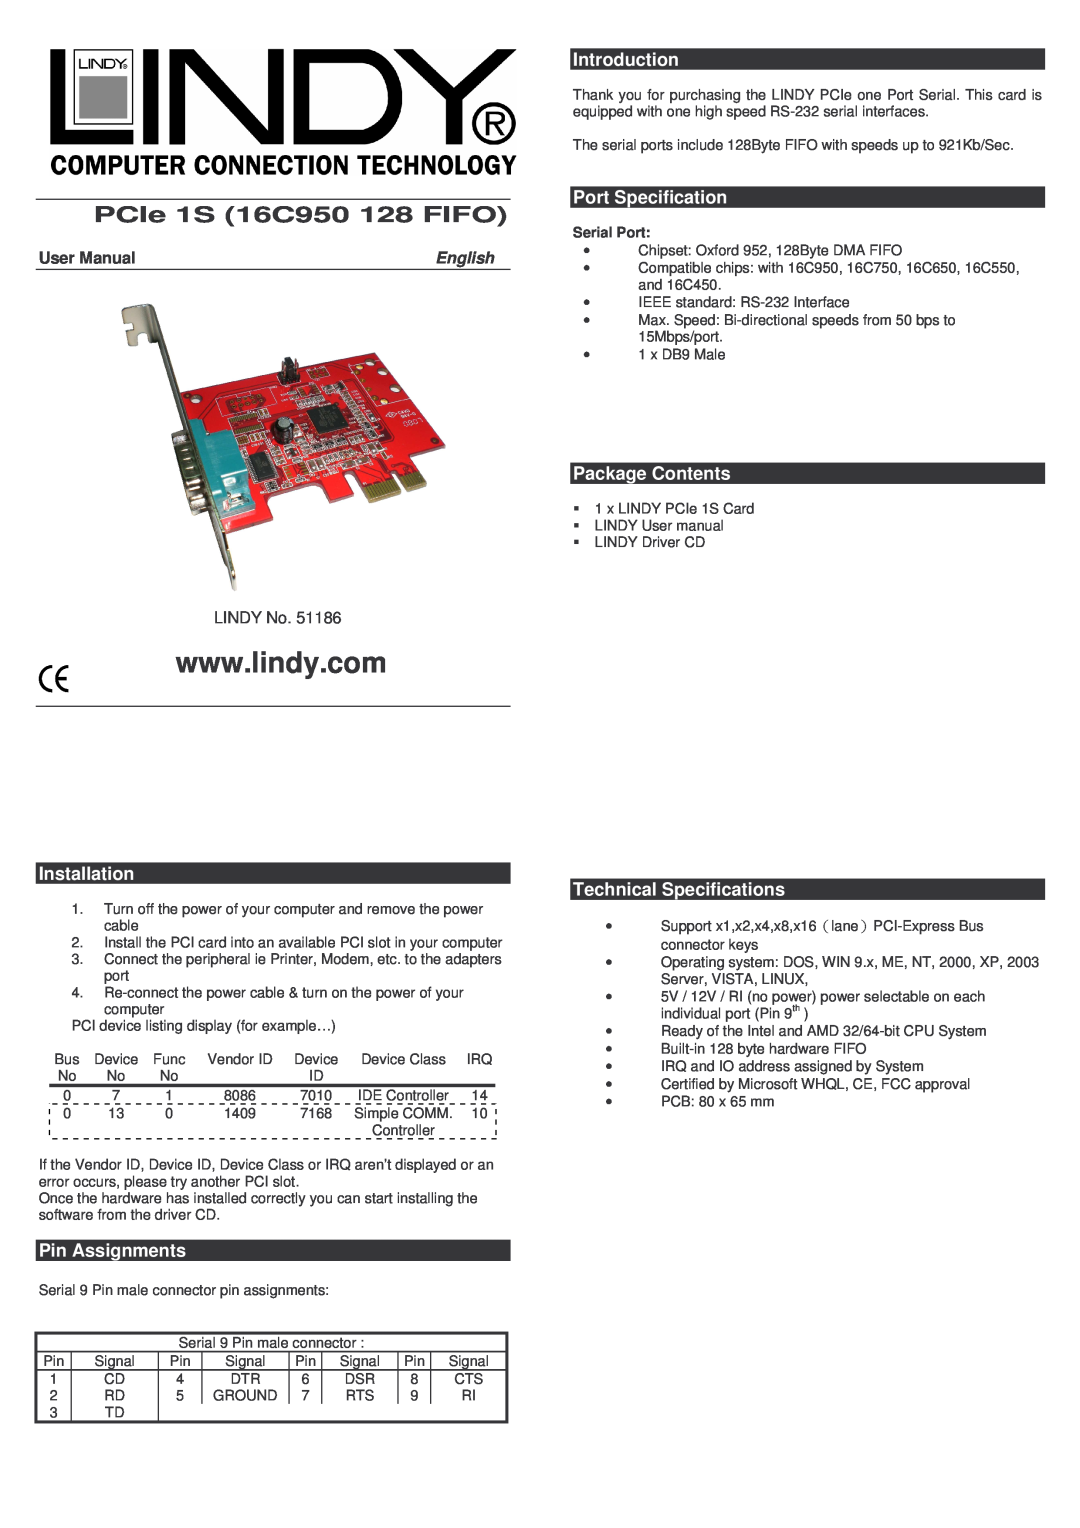 Lindy 51186 technical specifications Installation, Pin Assignments, Introduction, Port Specification, Package Contents 